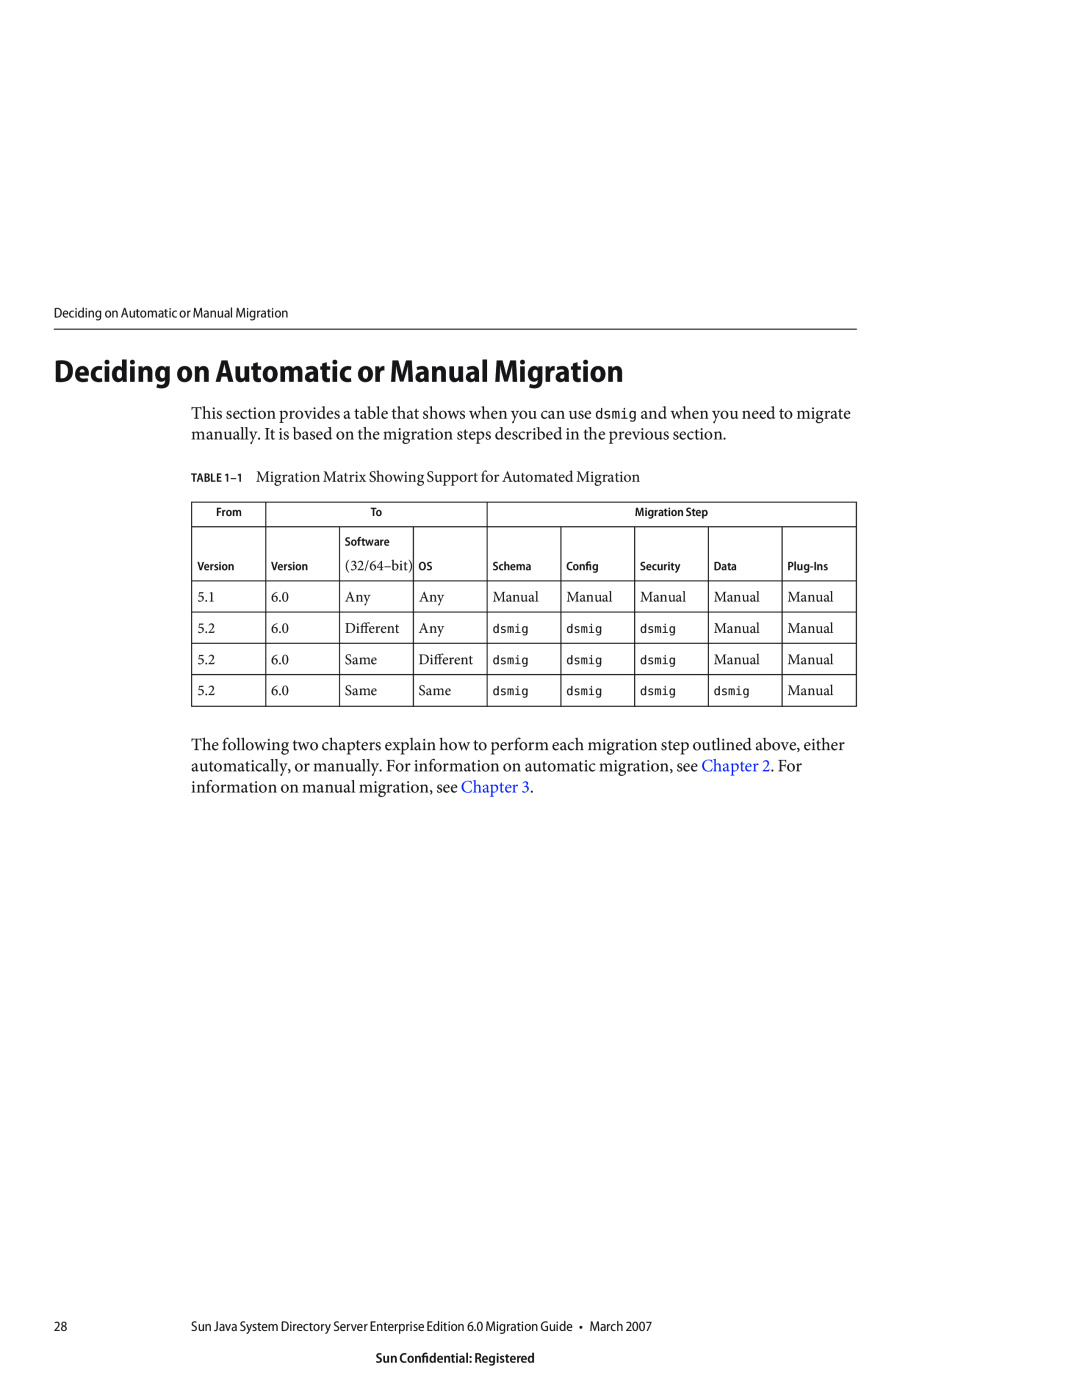 Sun Microsystems 8190994 manual Deciding on Automatic or Manual Migration 